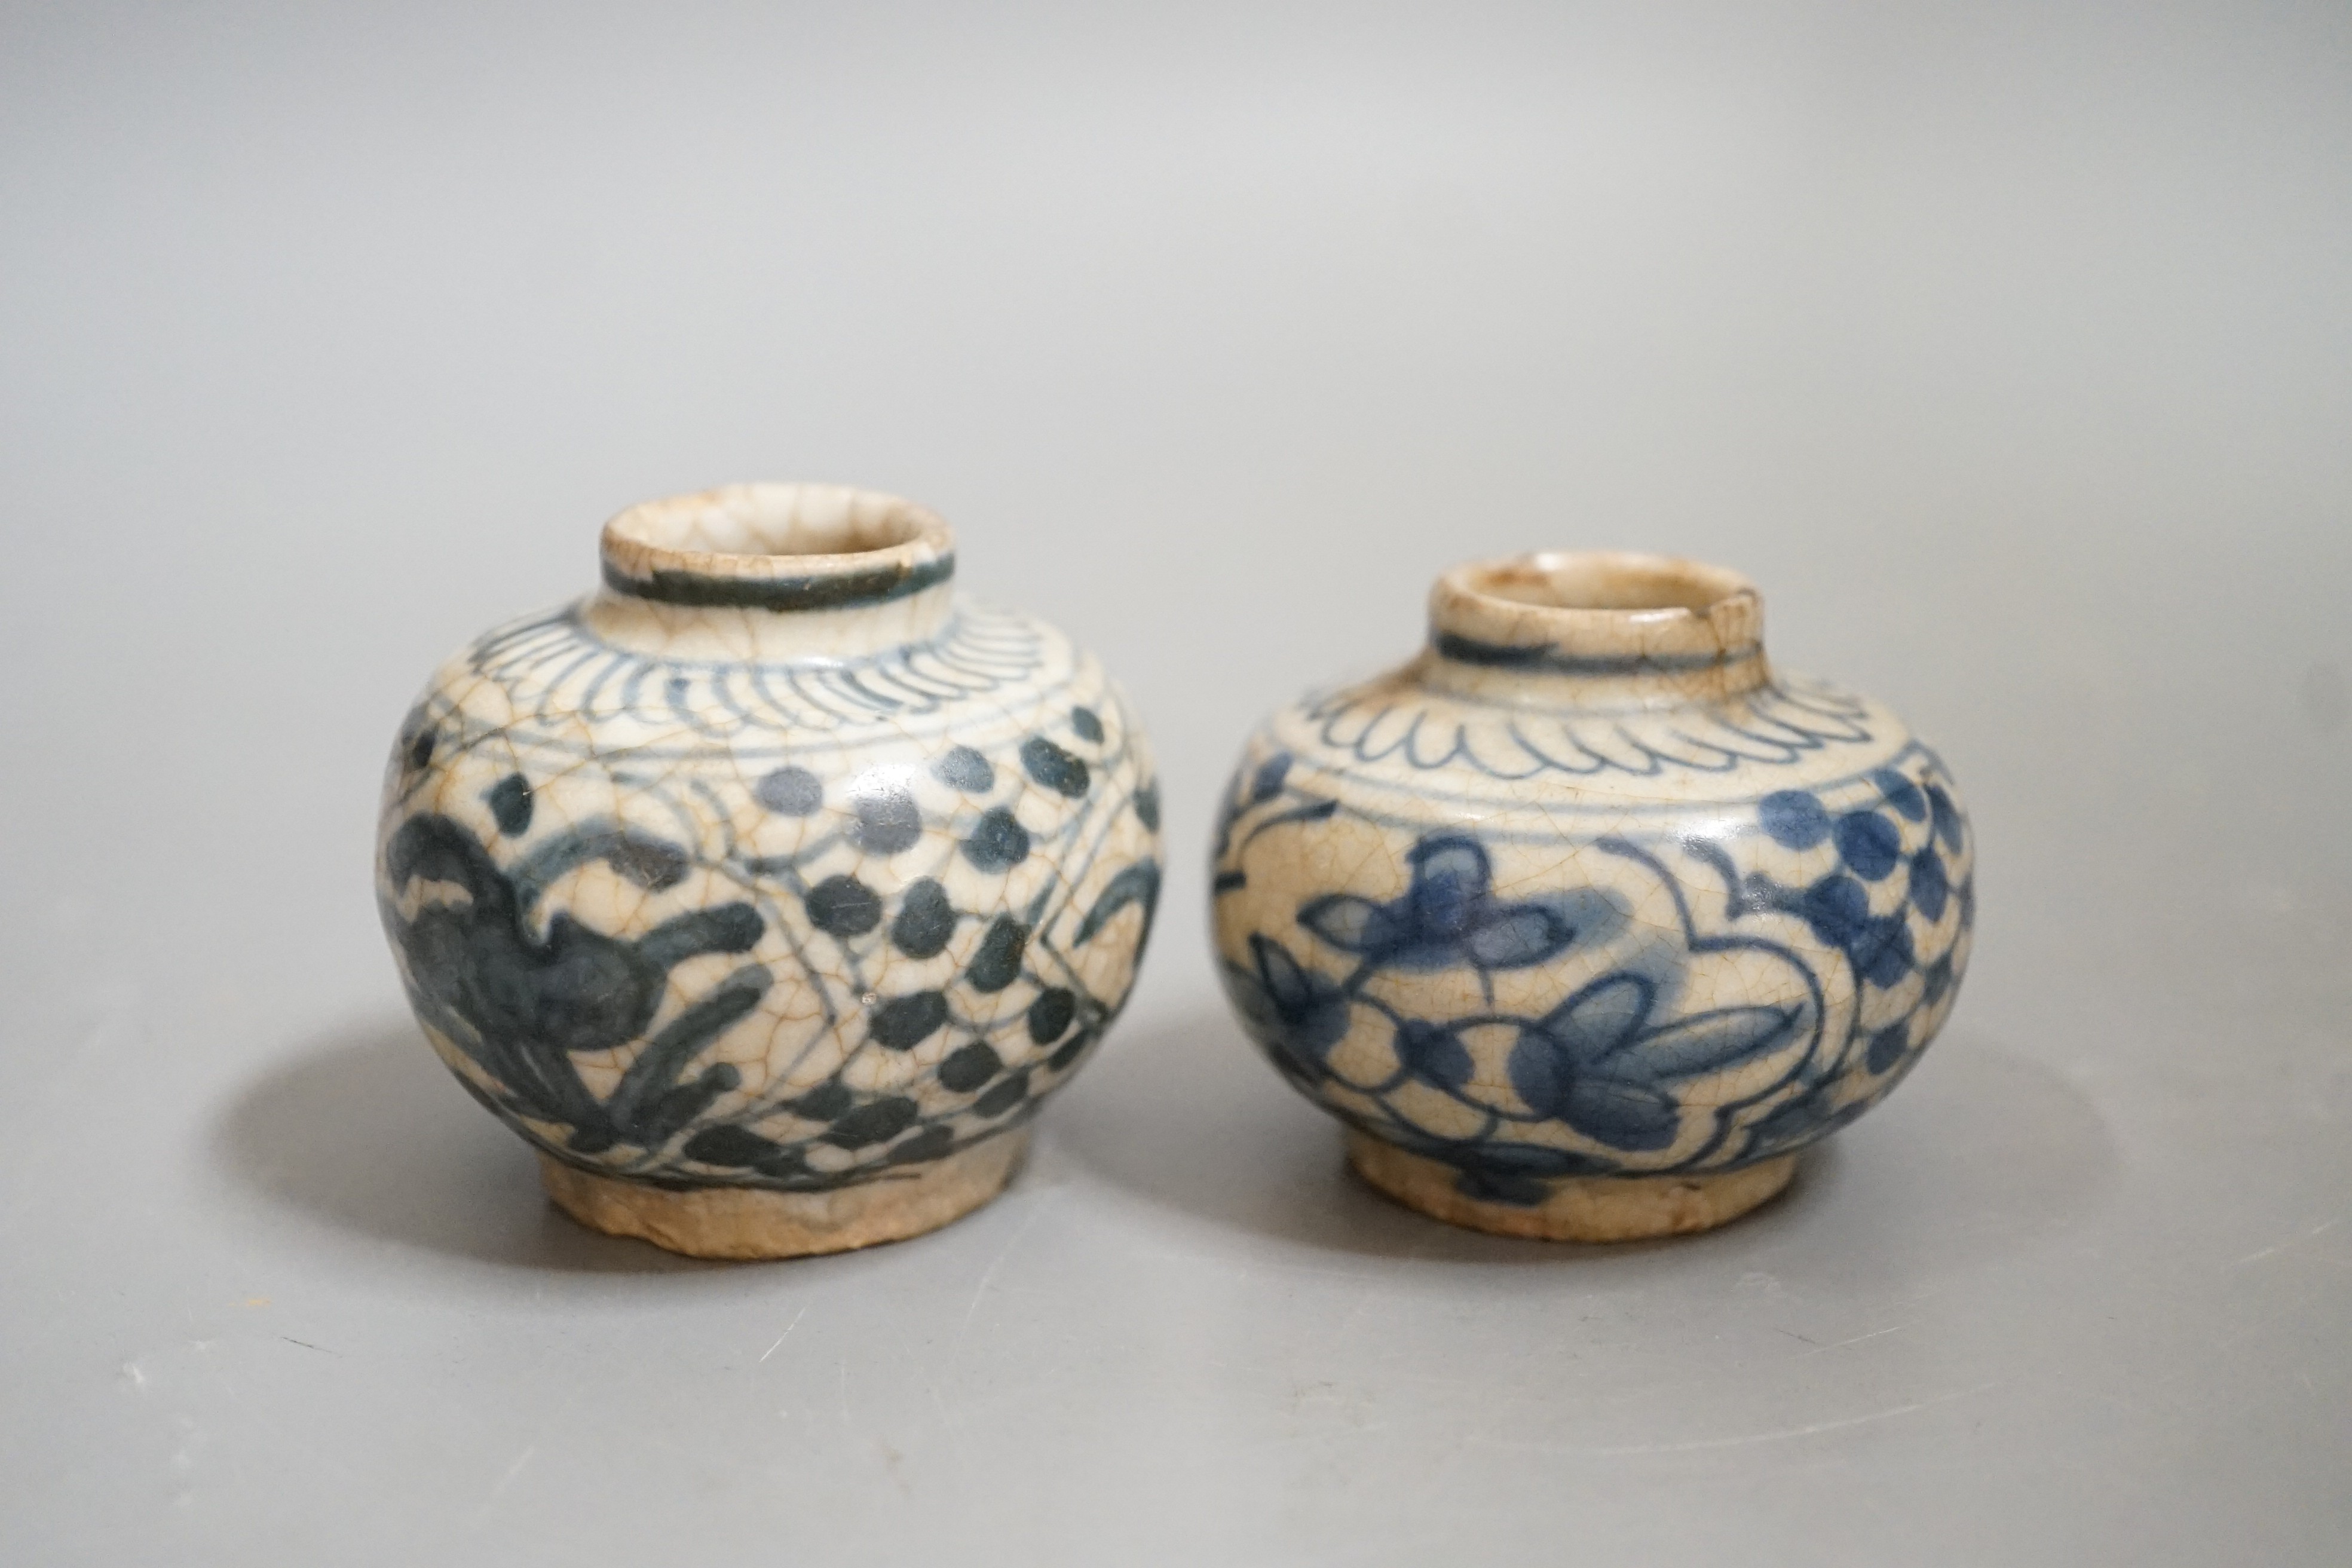 Two Chinese Swatow blue and white jarlets, early 17th century, 5cm tall